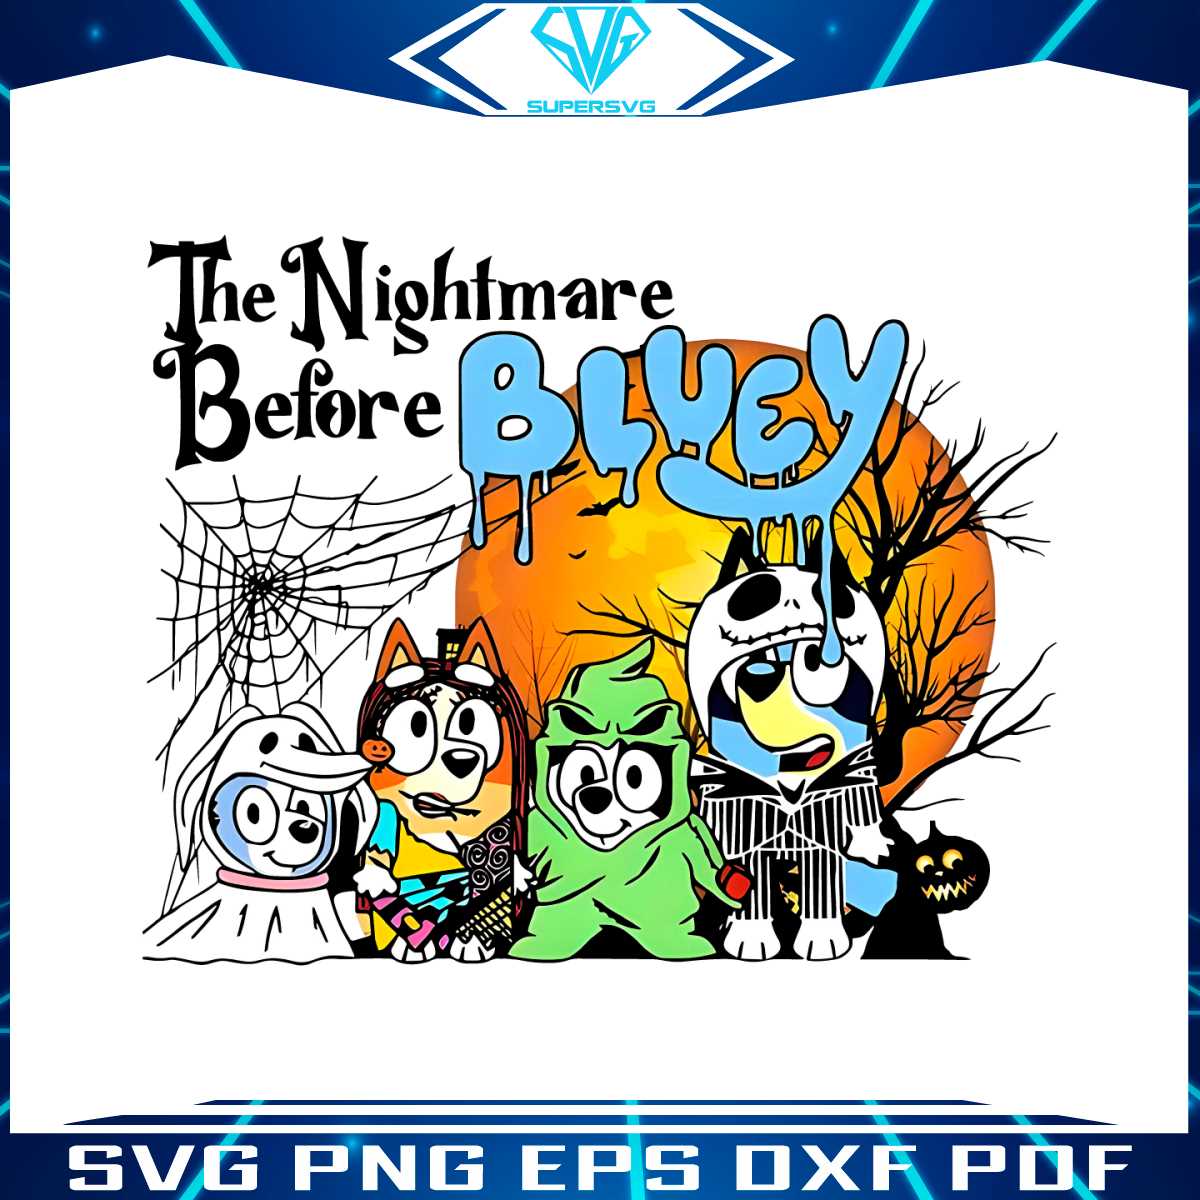 the-nightmare-before-bluey-horror-movie-png-download